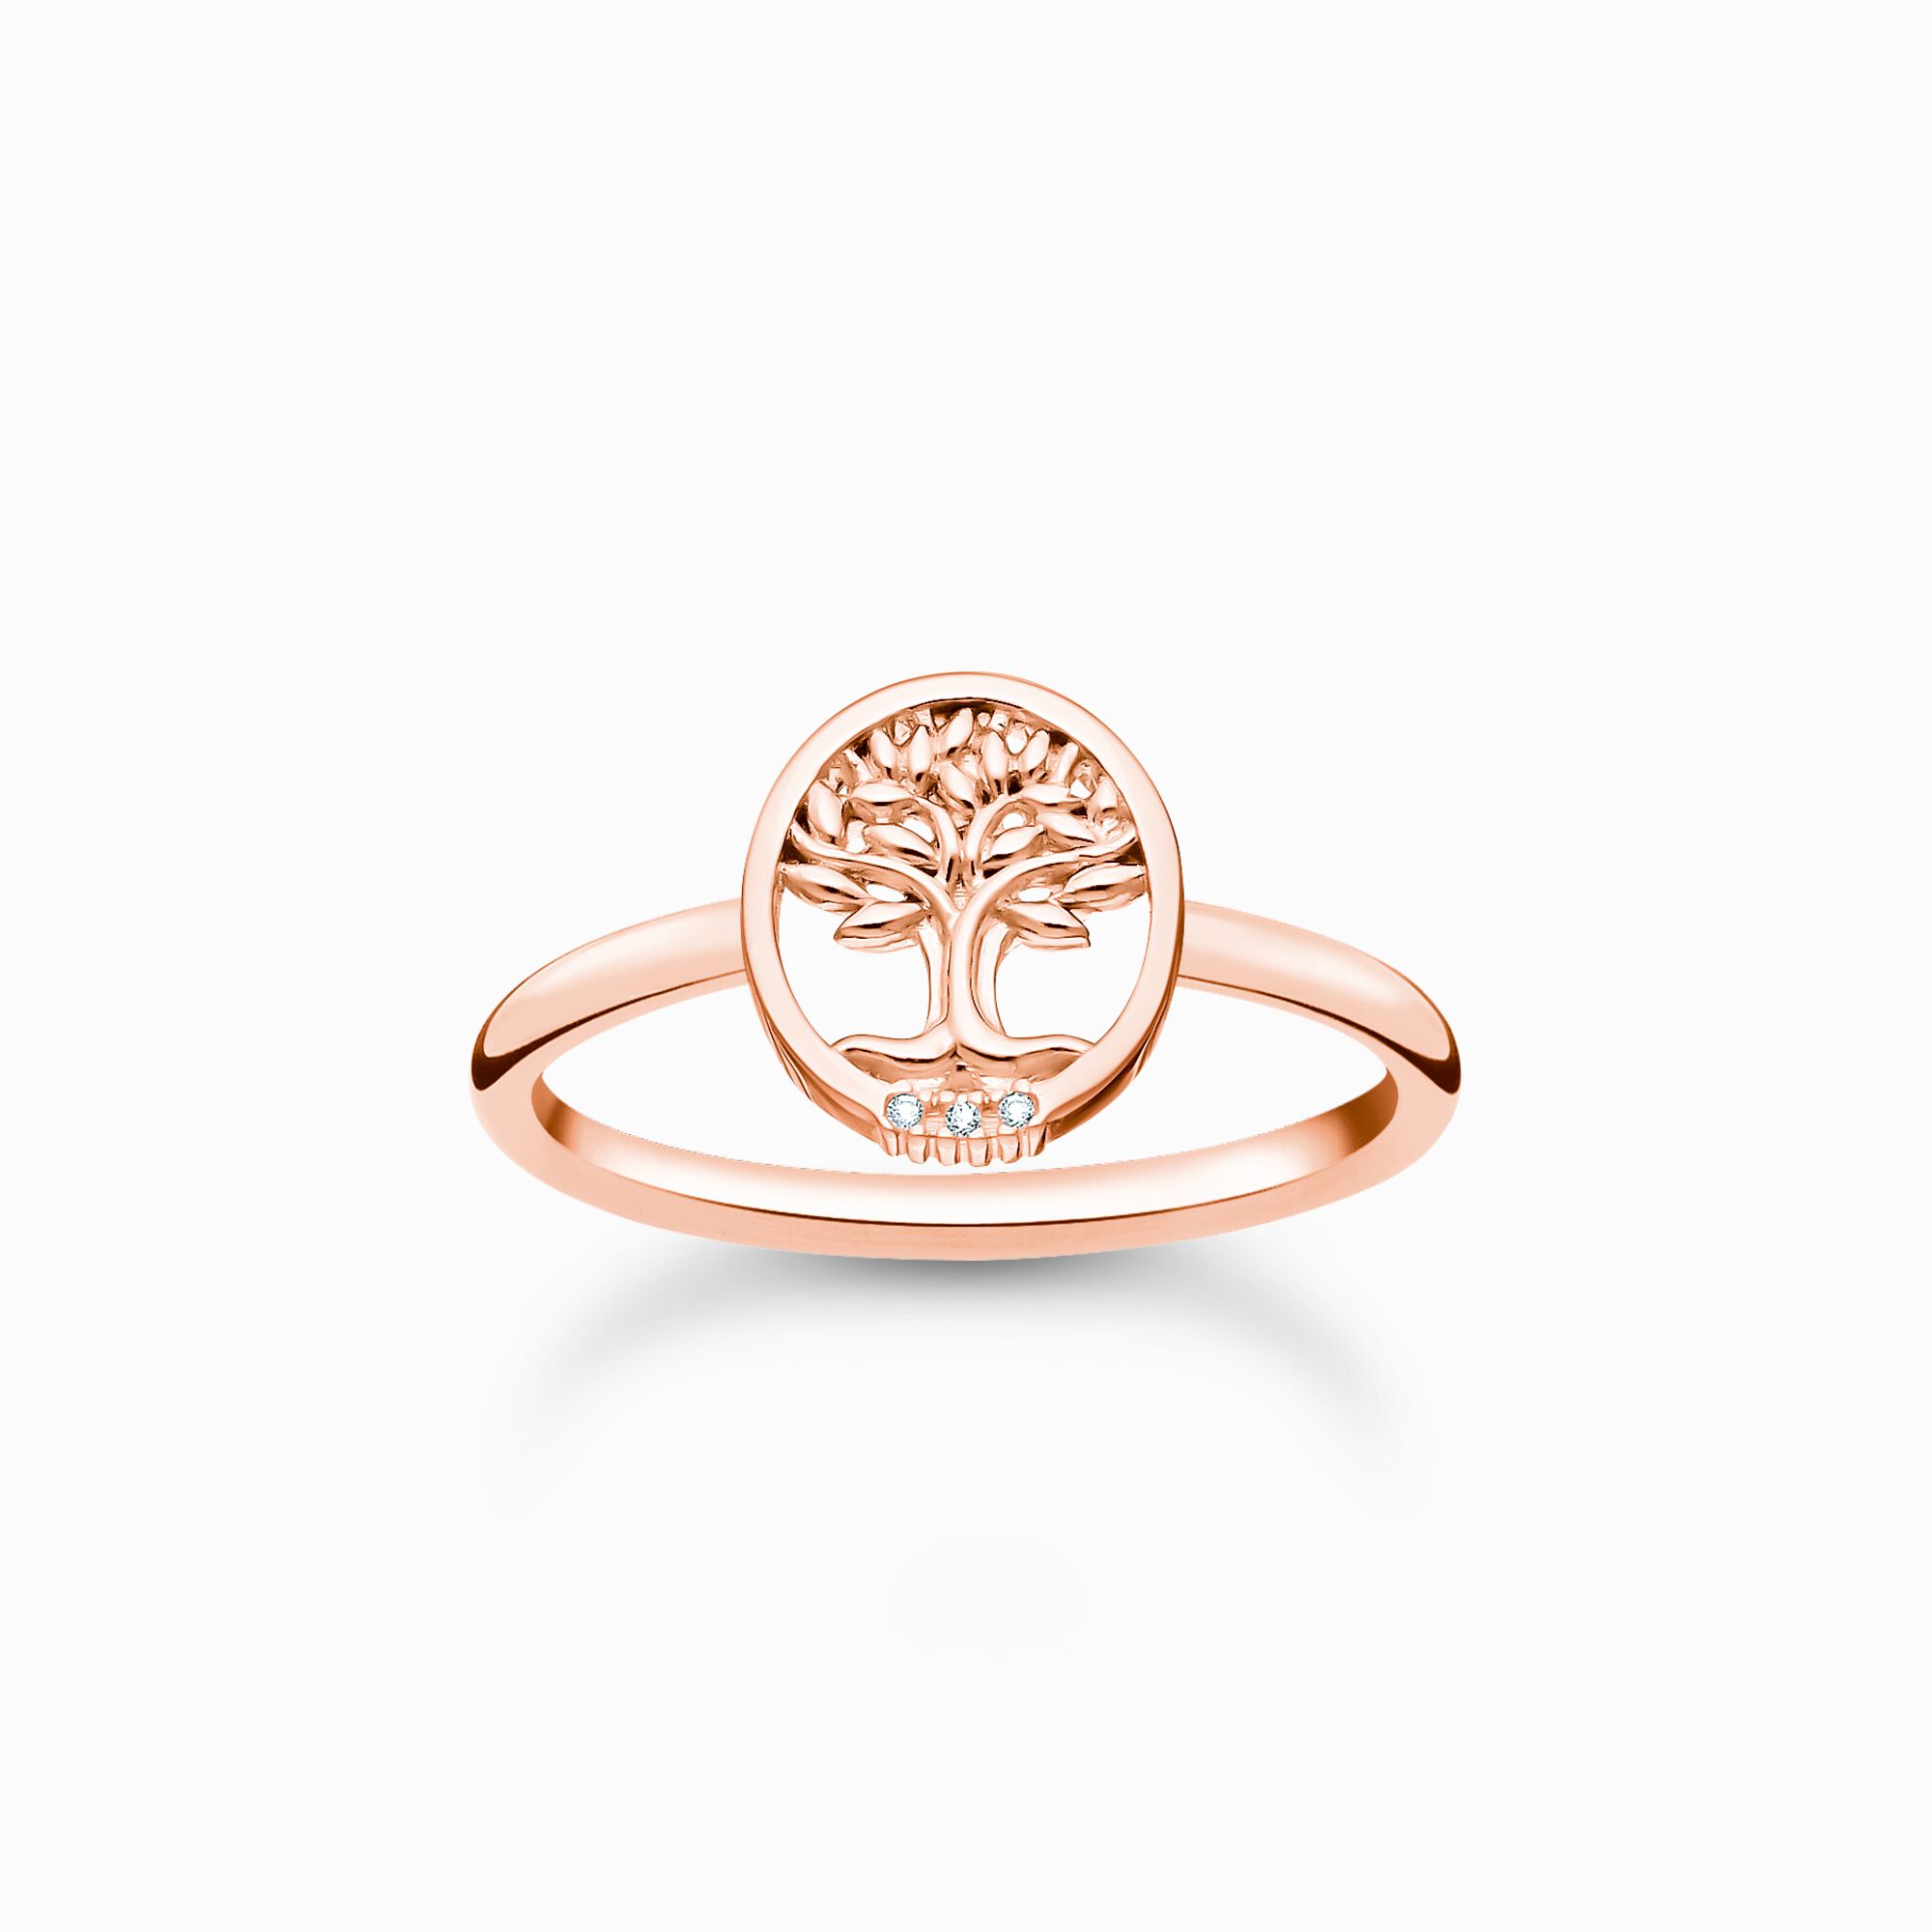 Rosé golden ring for women with tree of love motif – THOMAS SABO